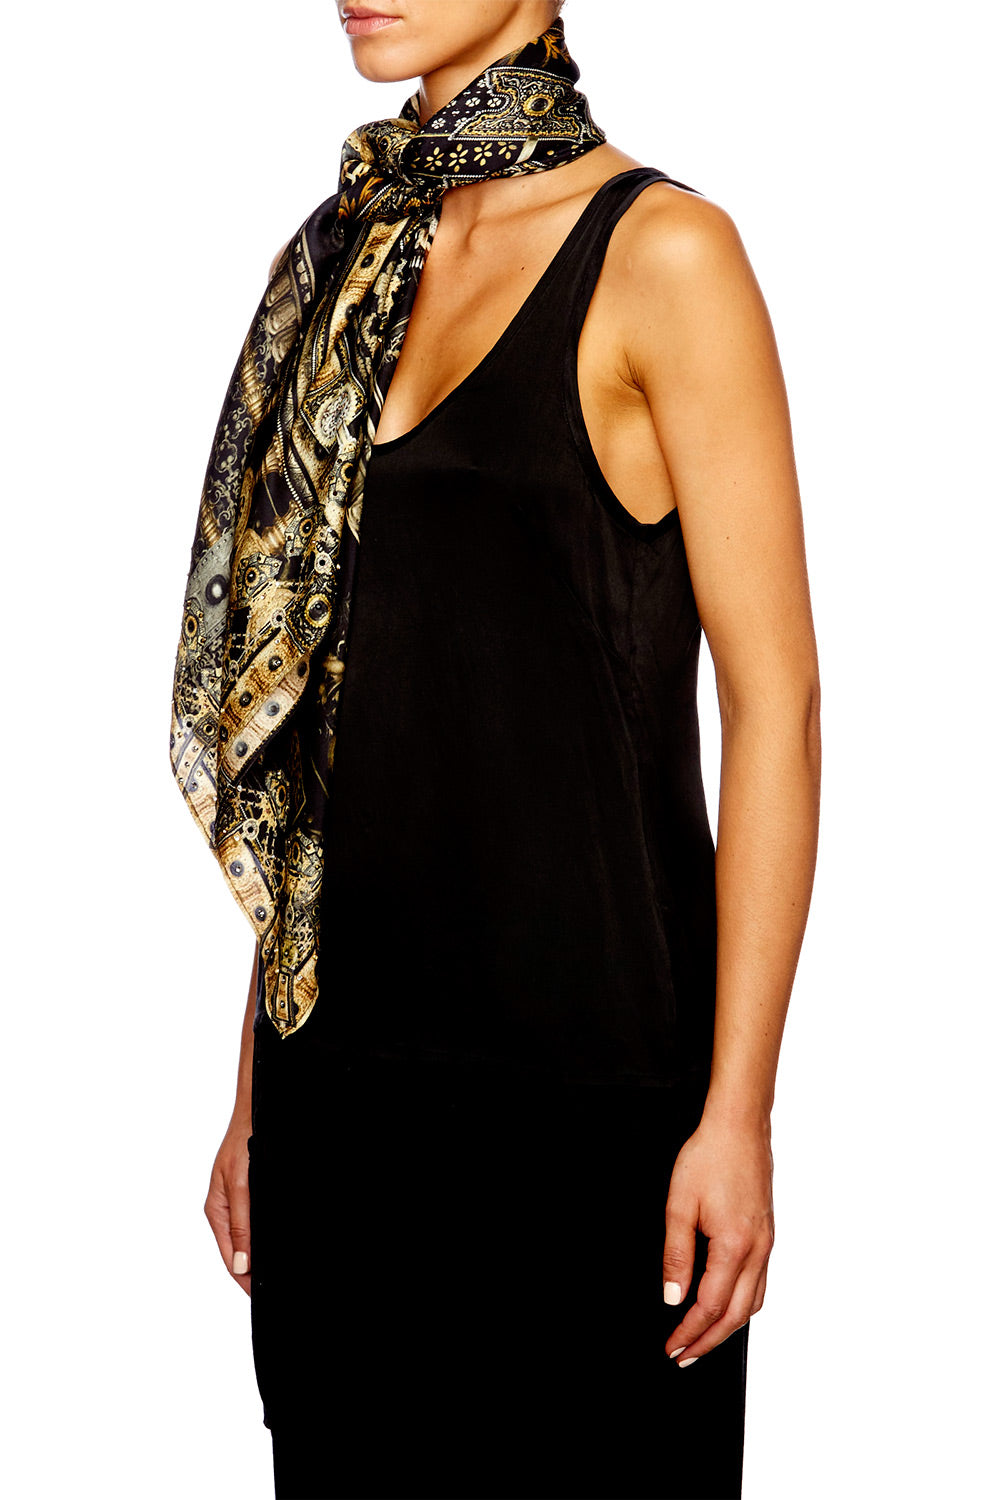 FOR THE LOVE OF LHASA LARGE SQUARE SCARF